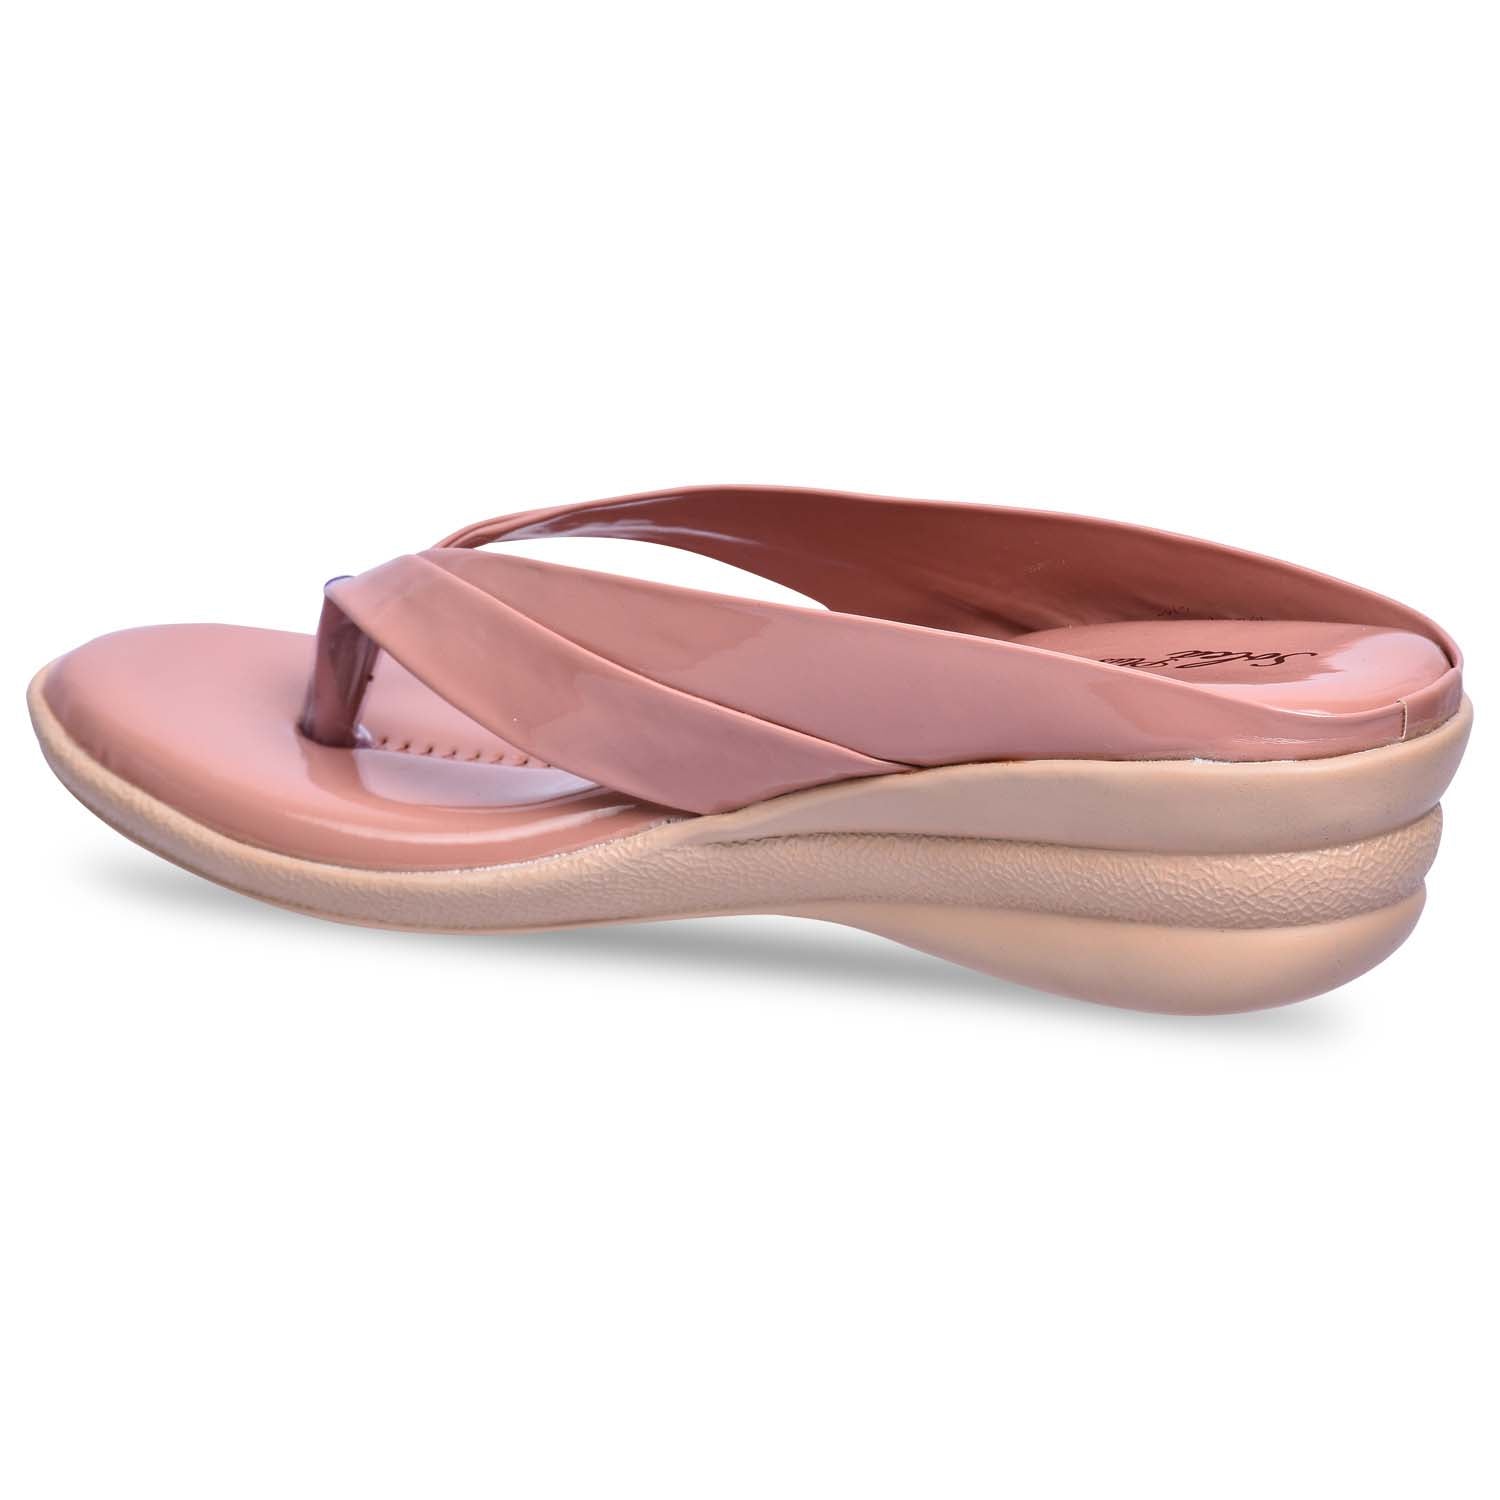 Paragon R1025L Women Sandals | Casual &amp; Formal Sandals | Stylish, Comfortable &amp; Durable | For Daily &amp; Occasion Wear